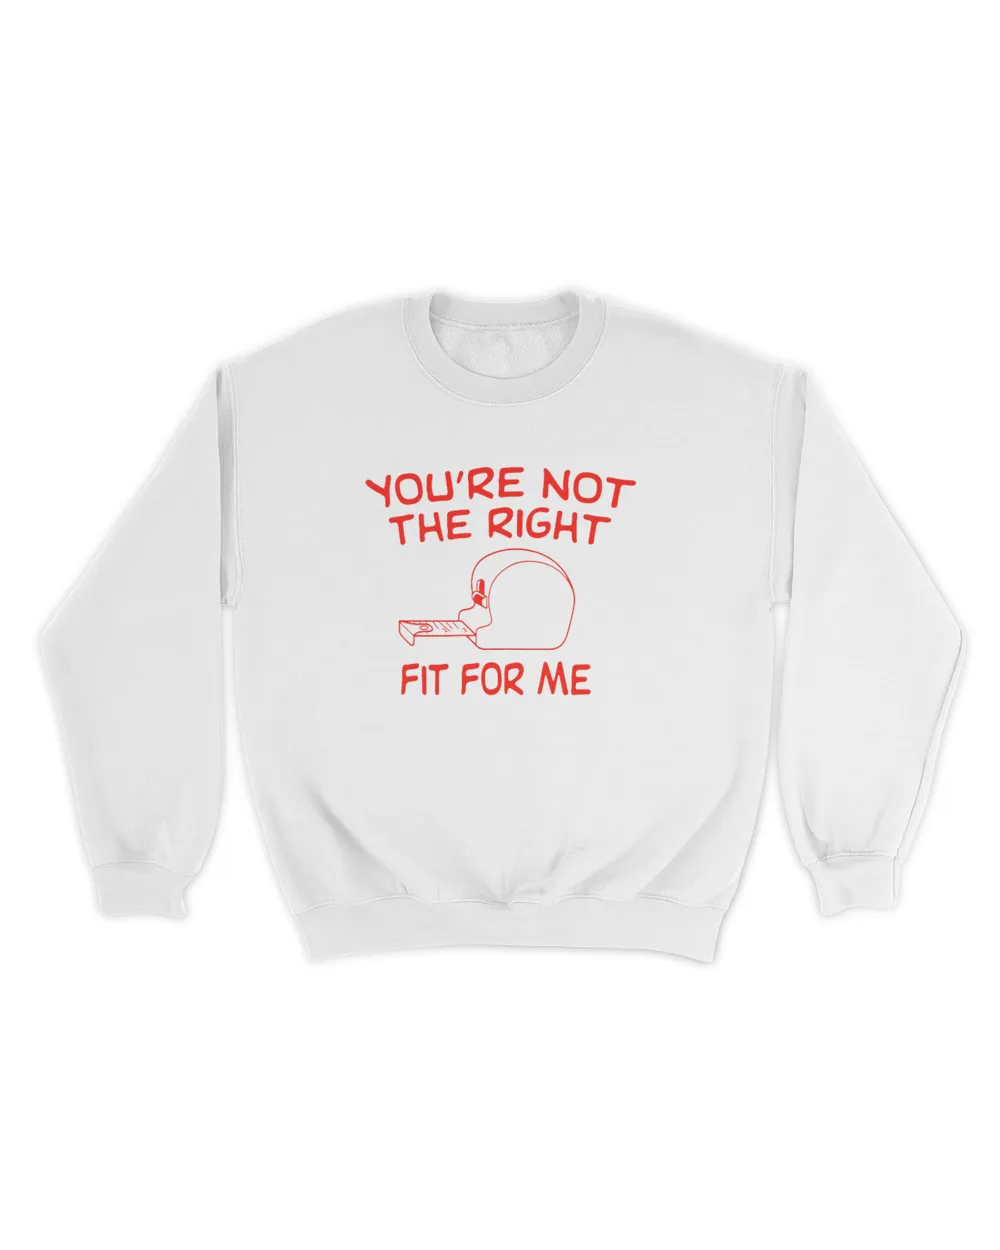 You're Not The Right Fit For Me Tee Shirt Unisex Sweatshirt white 